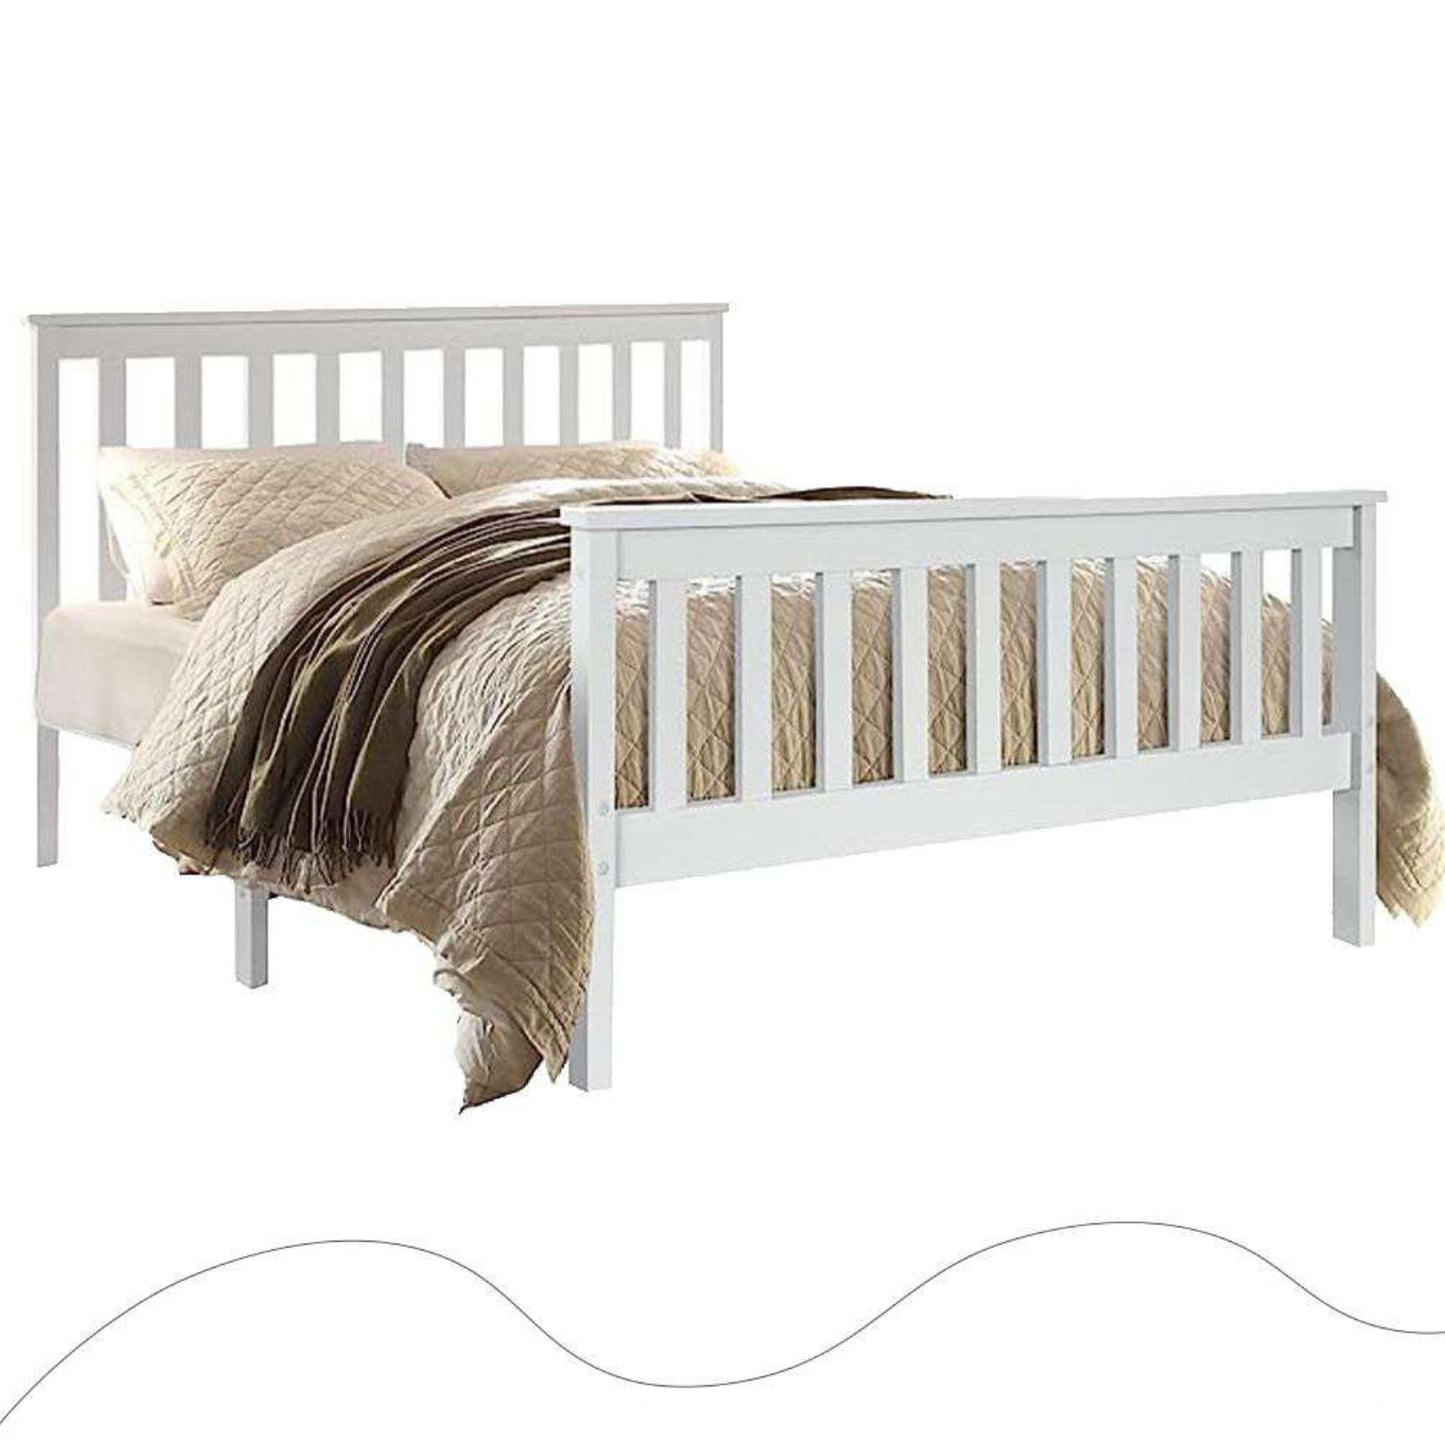 Very Elegant and Strong King Size White Pinewood Bed Frame